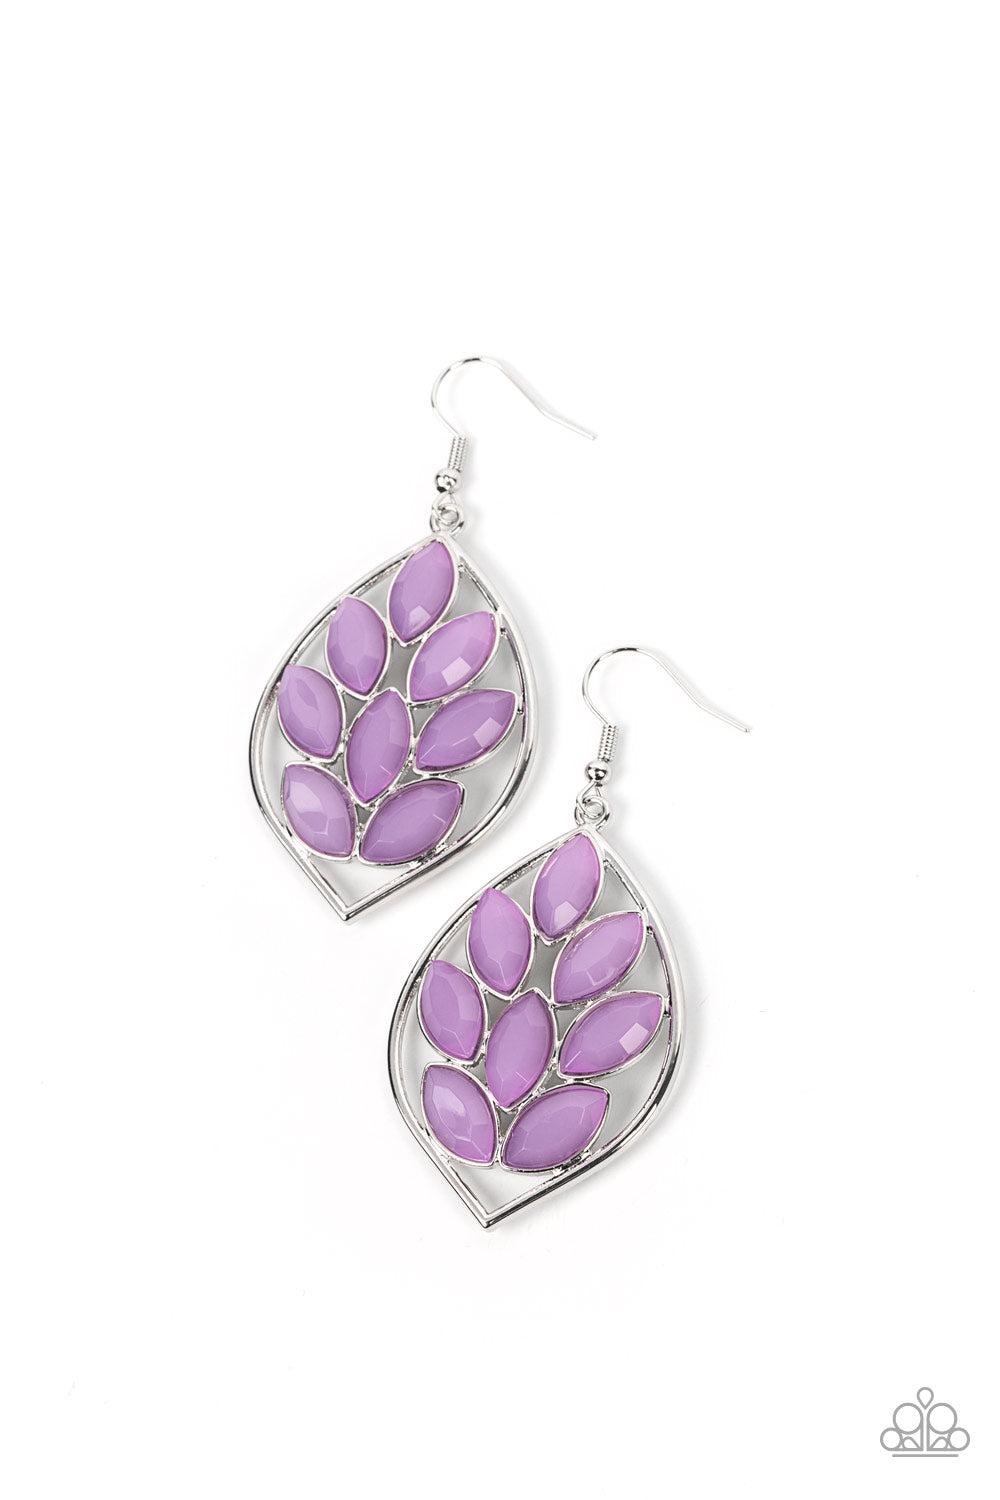 Glacial Glades Purple Earrings - Paparazzi Accessories- lightbox - CarasShop.com - $5 Jewelry by Cara Jewels